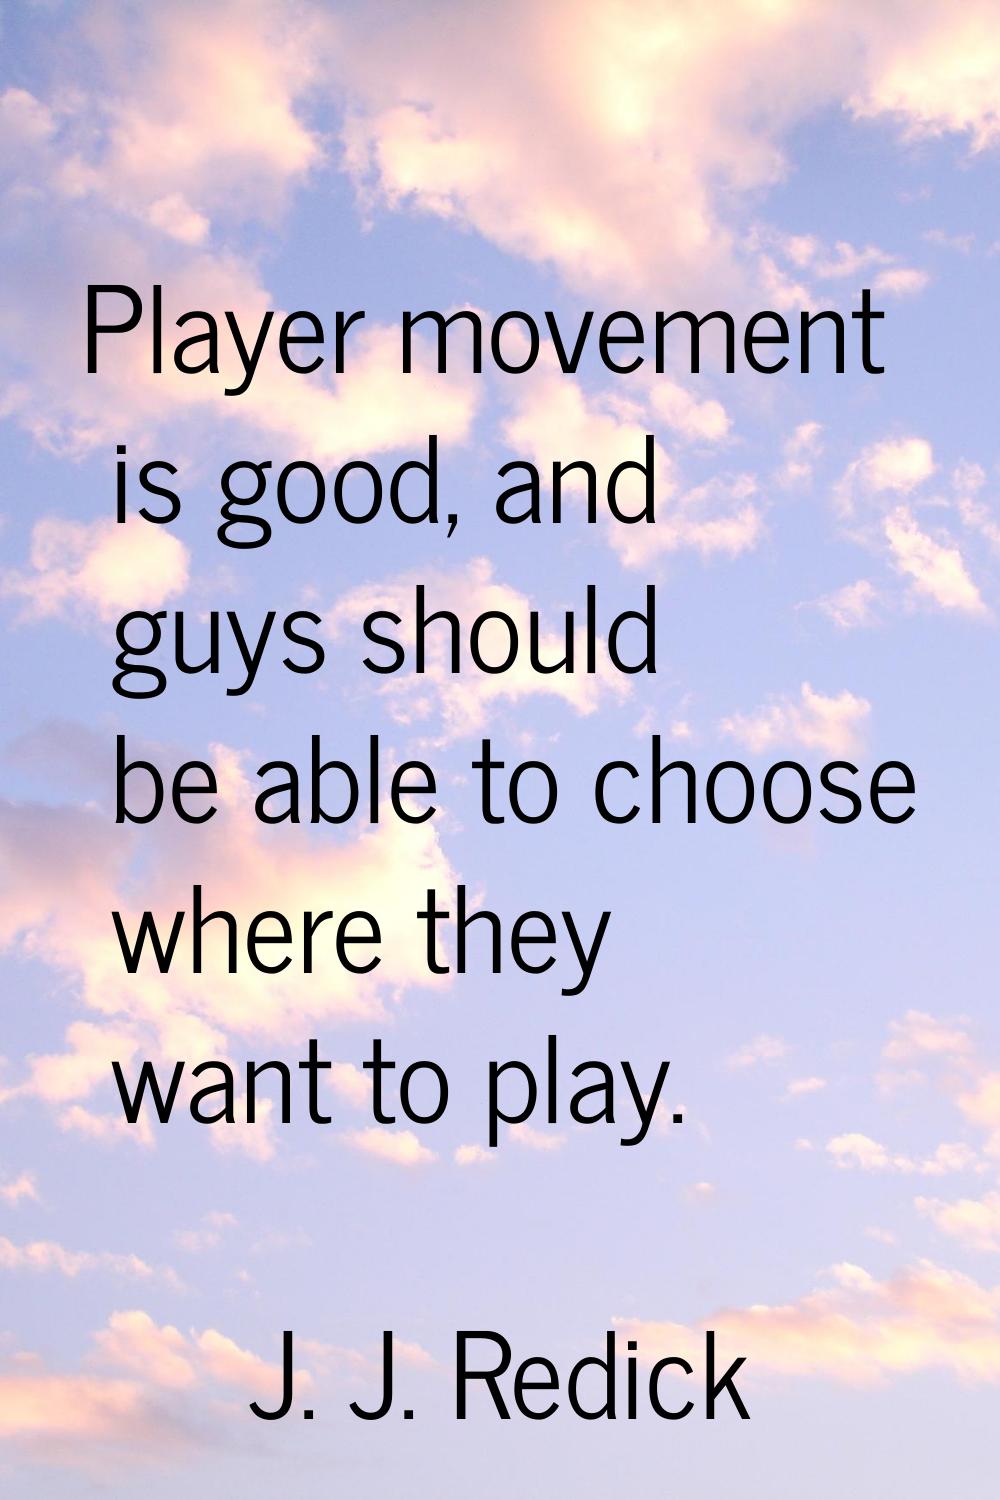 Player movement is good, and guys should be able to choose where they want to play.